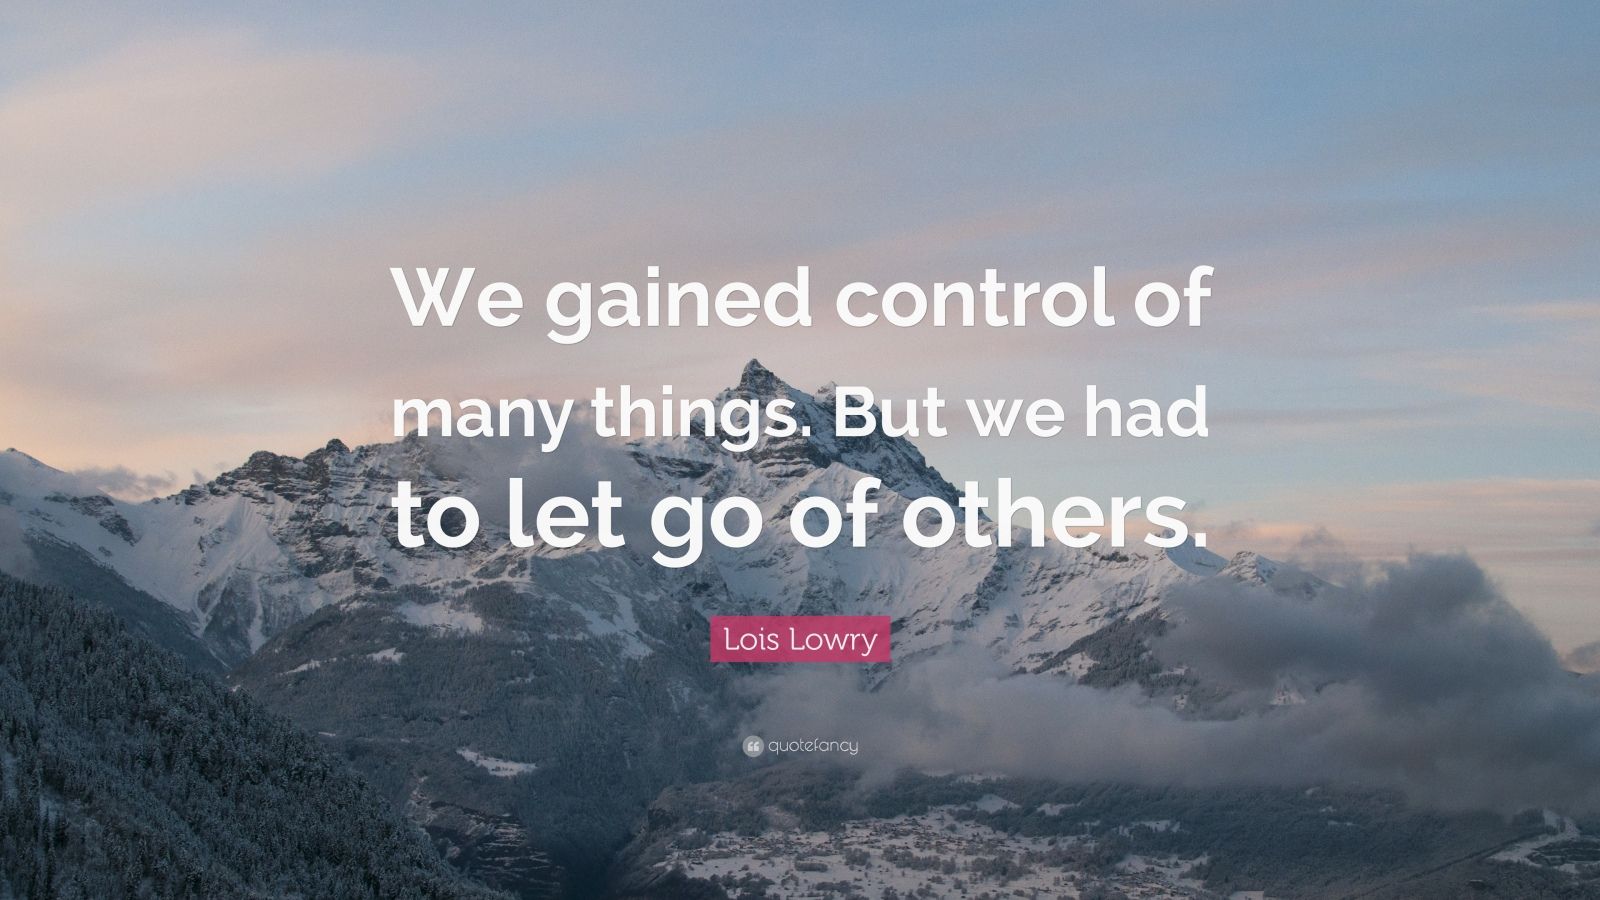 Lois Lowry Quote: “We gained control of many things. But we had to let ...